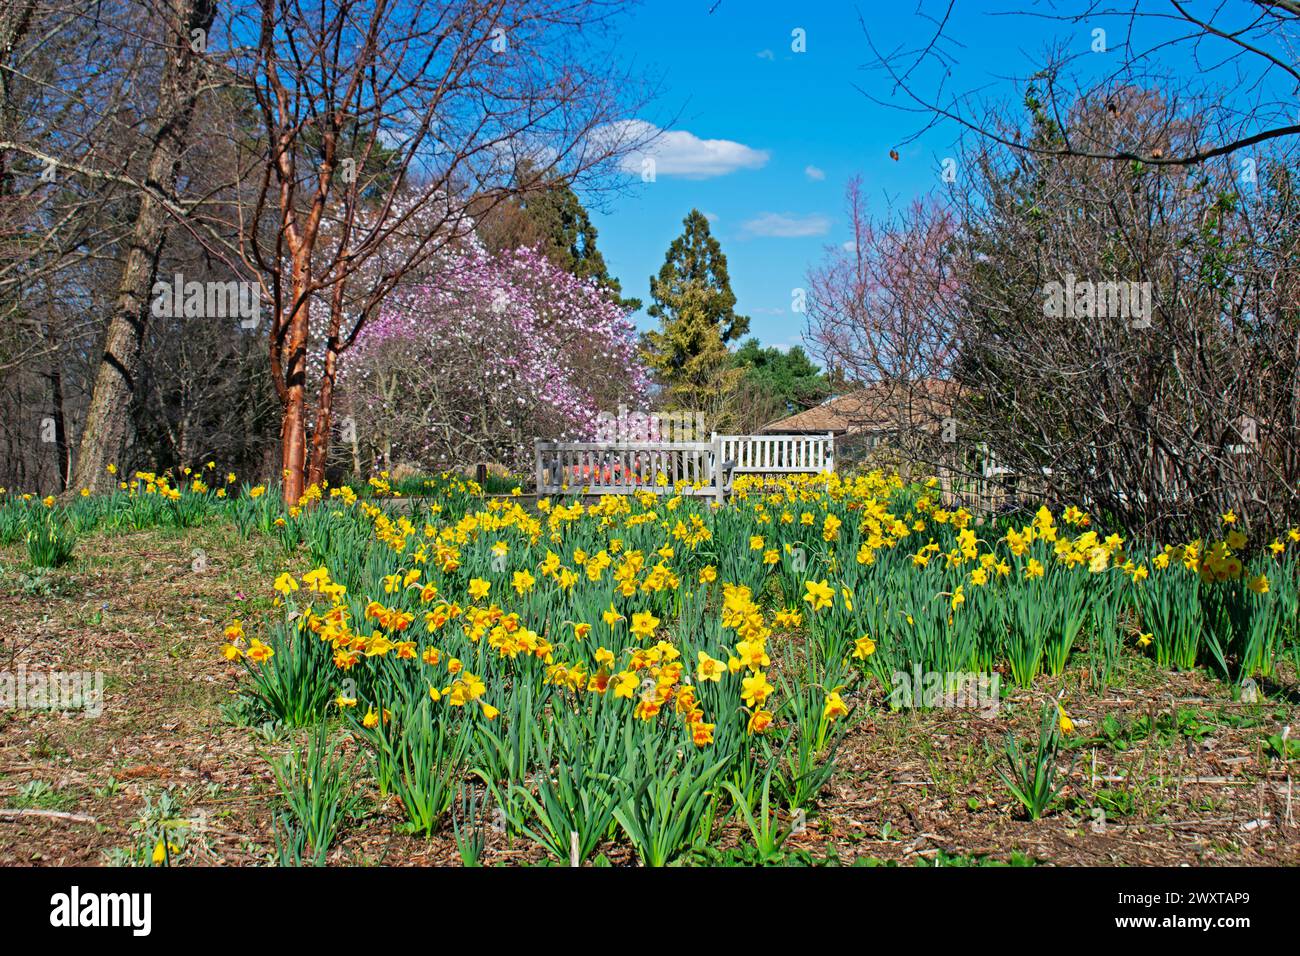 An early springtime daffodil flower bed frames a picturesque scene with a cottage in the background -03 Stock Photo